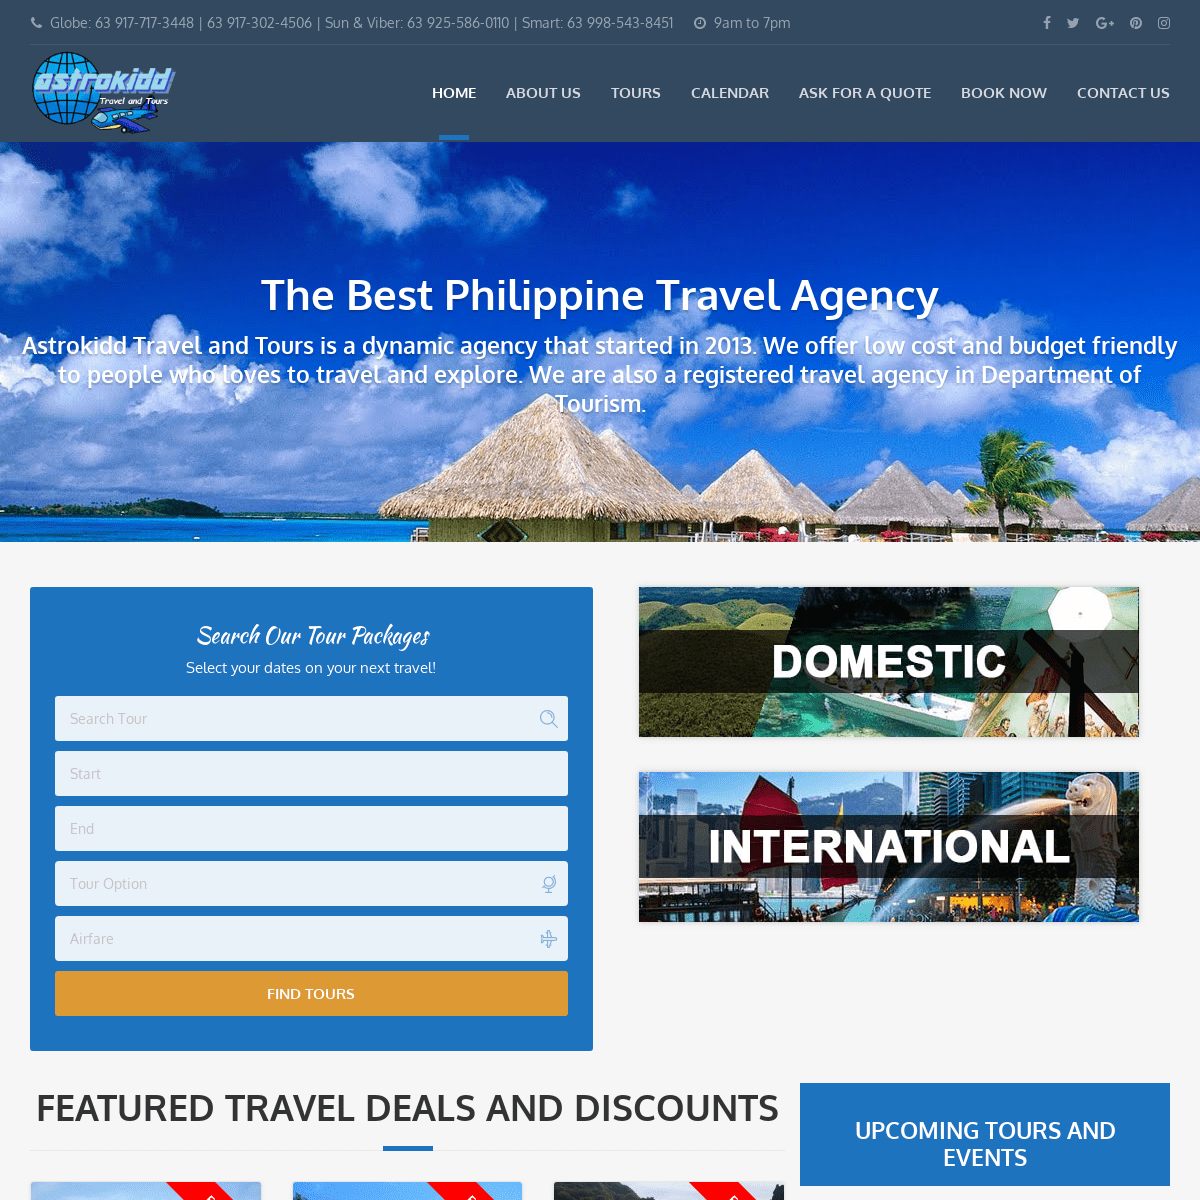 The Best Philippine Travel Agency - Astrokidd Travel and Tours